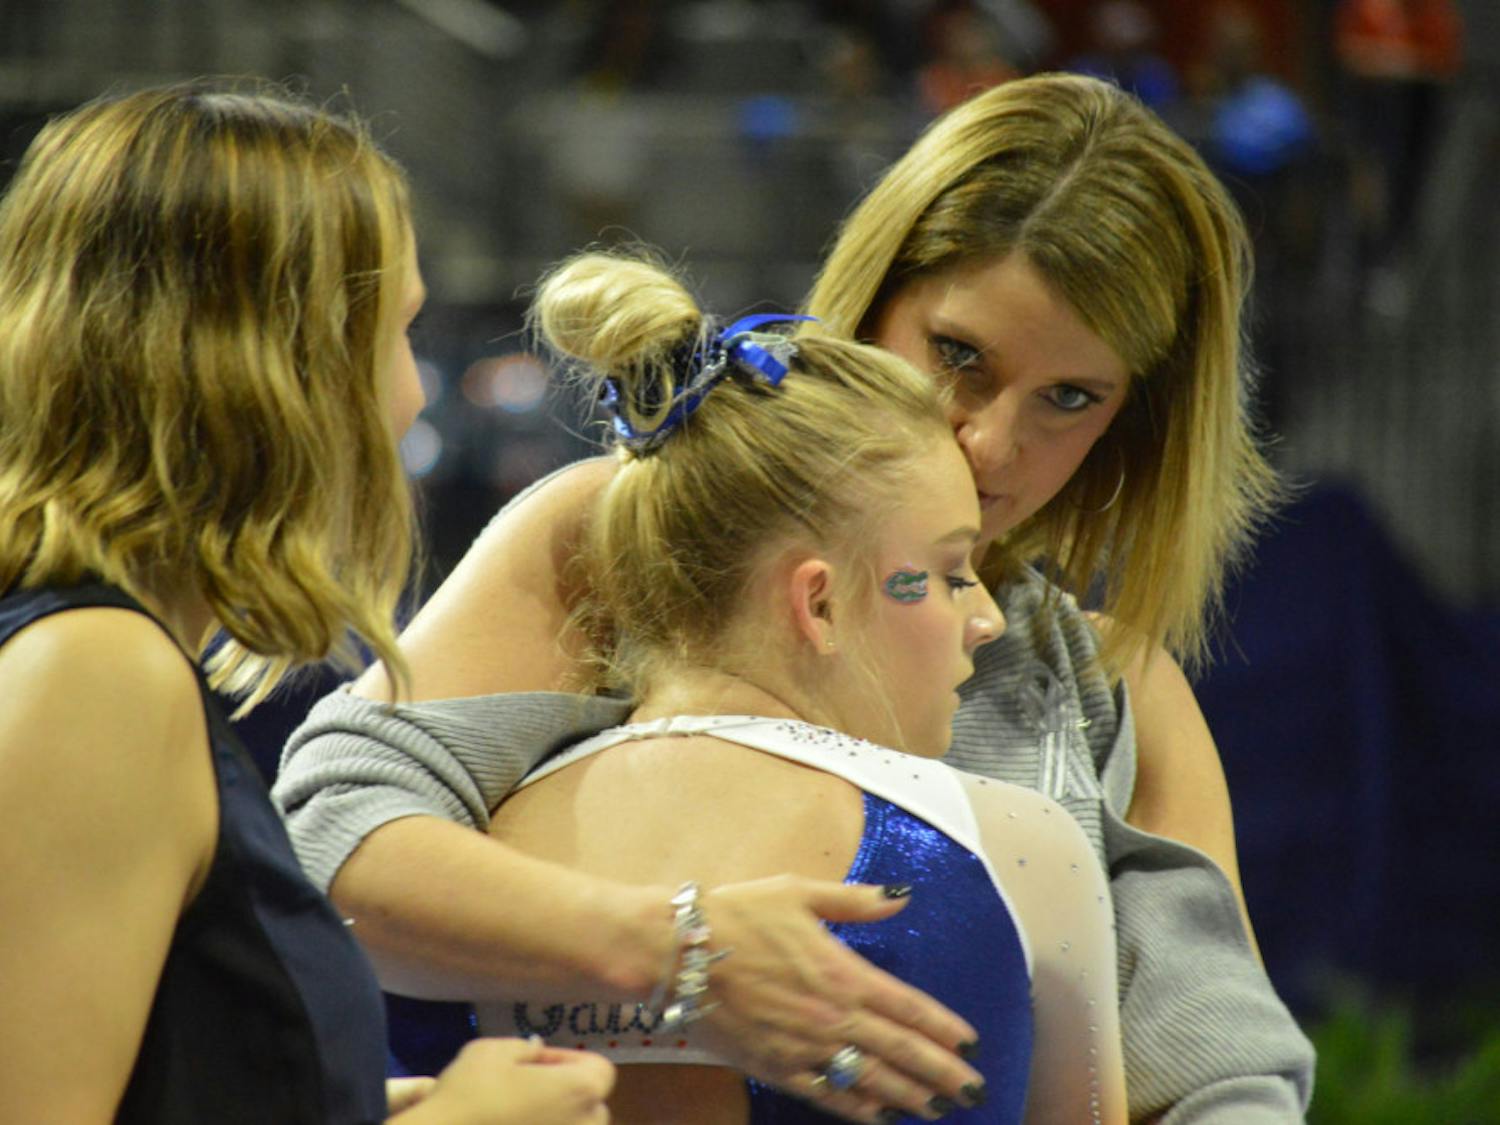 Gymnastics coach Jenny Rowland  praised her team’s mental fortitude Friday night.“They continued to fight all the way through to the very last performance as it was tight all the way up until that very last dismount.”